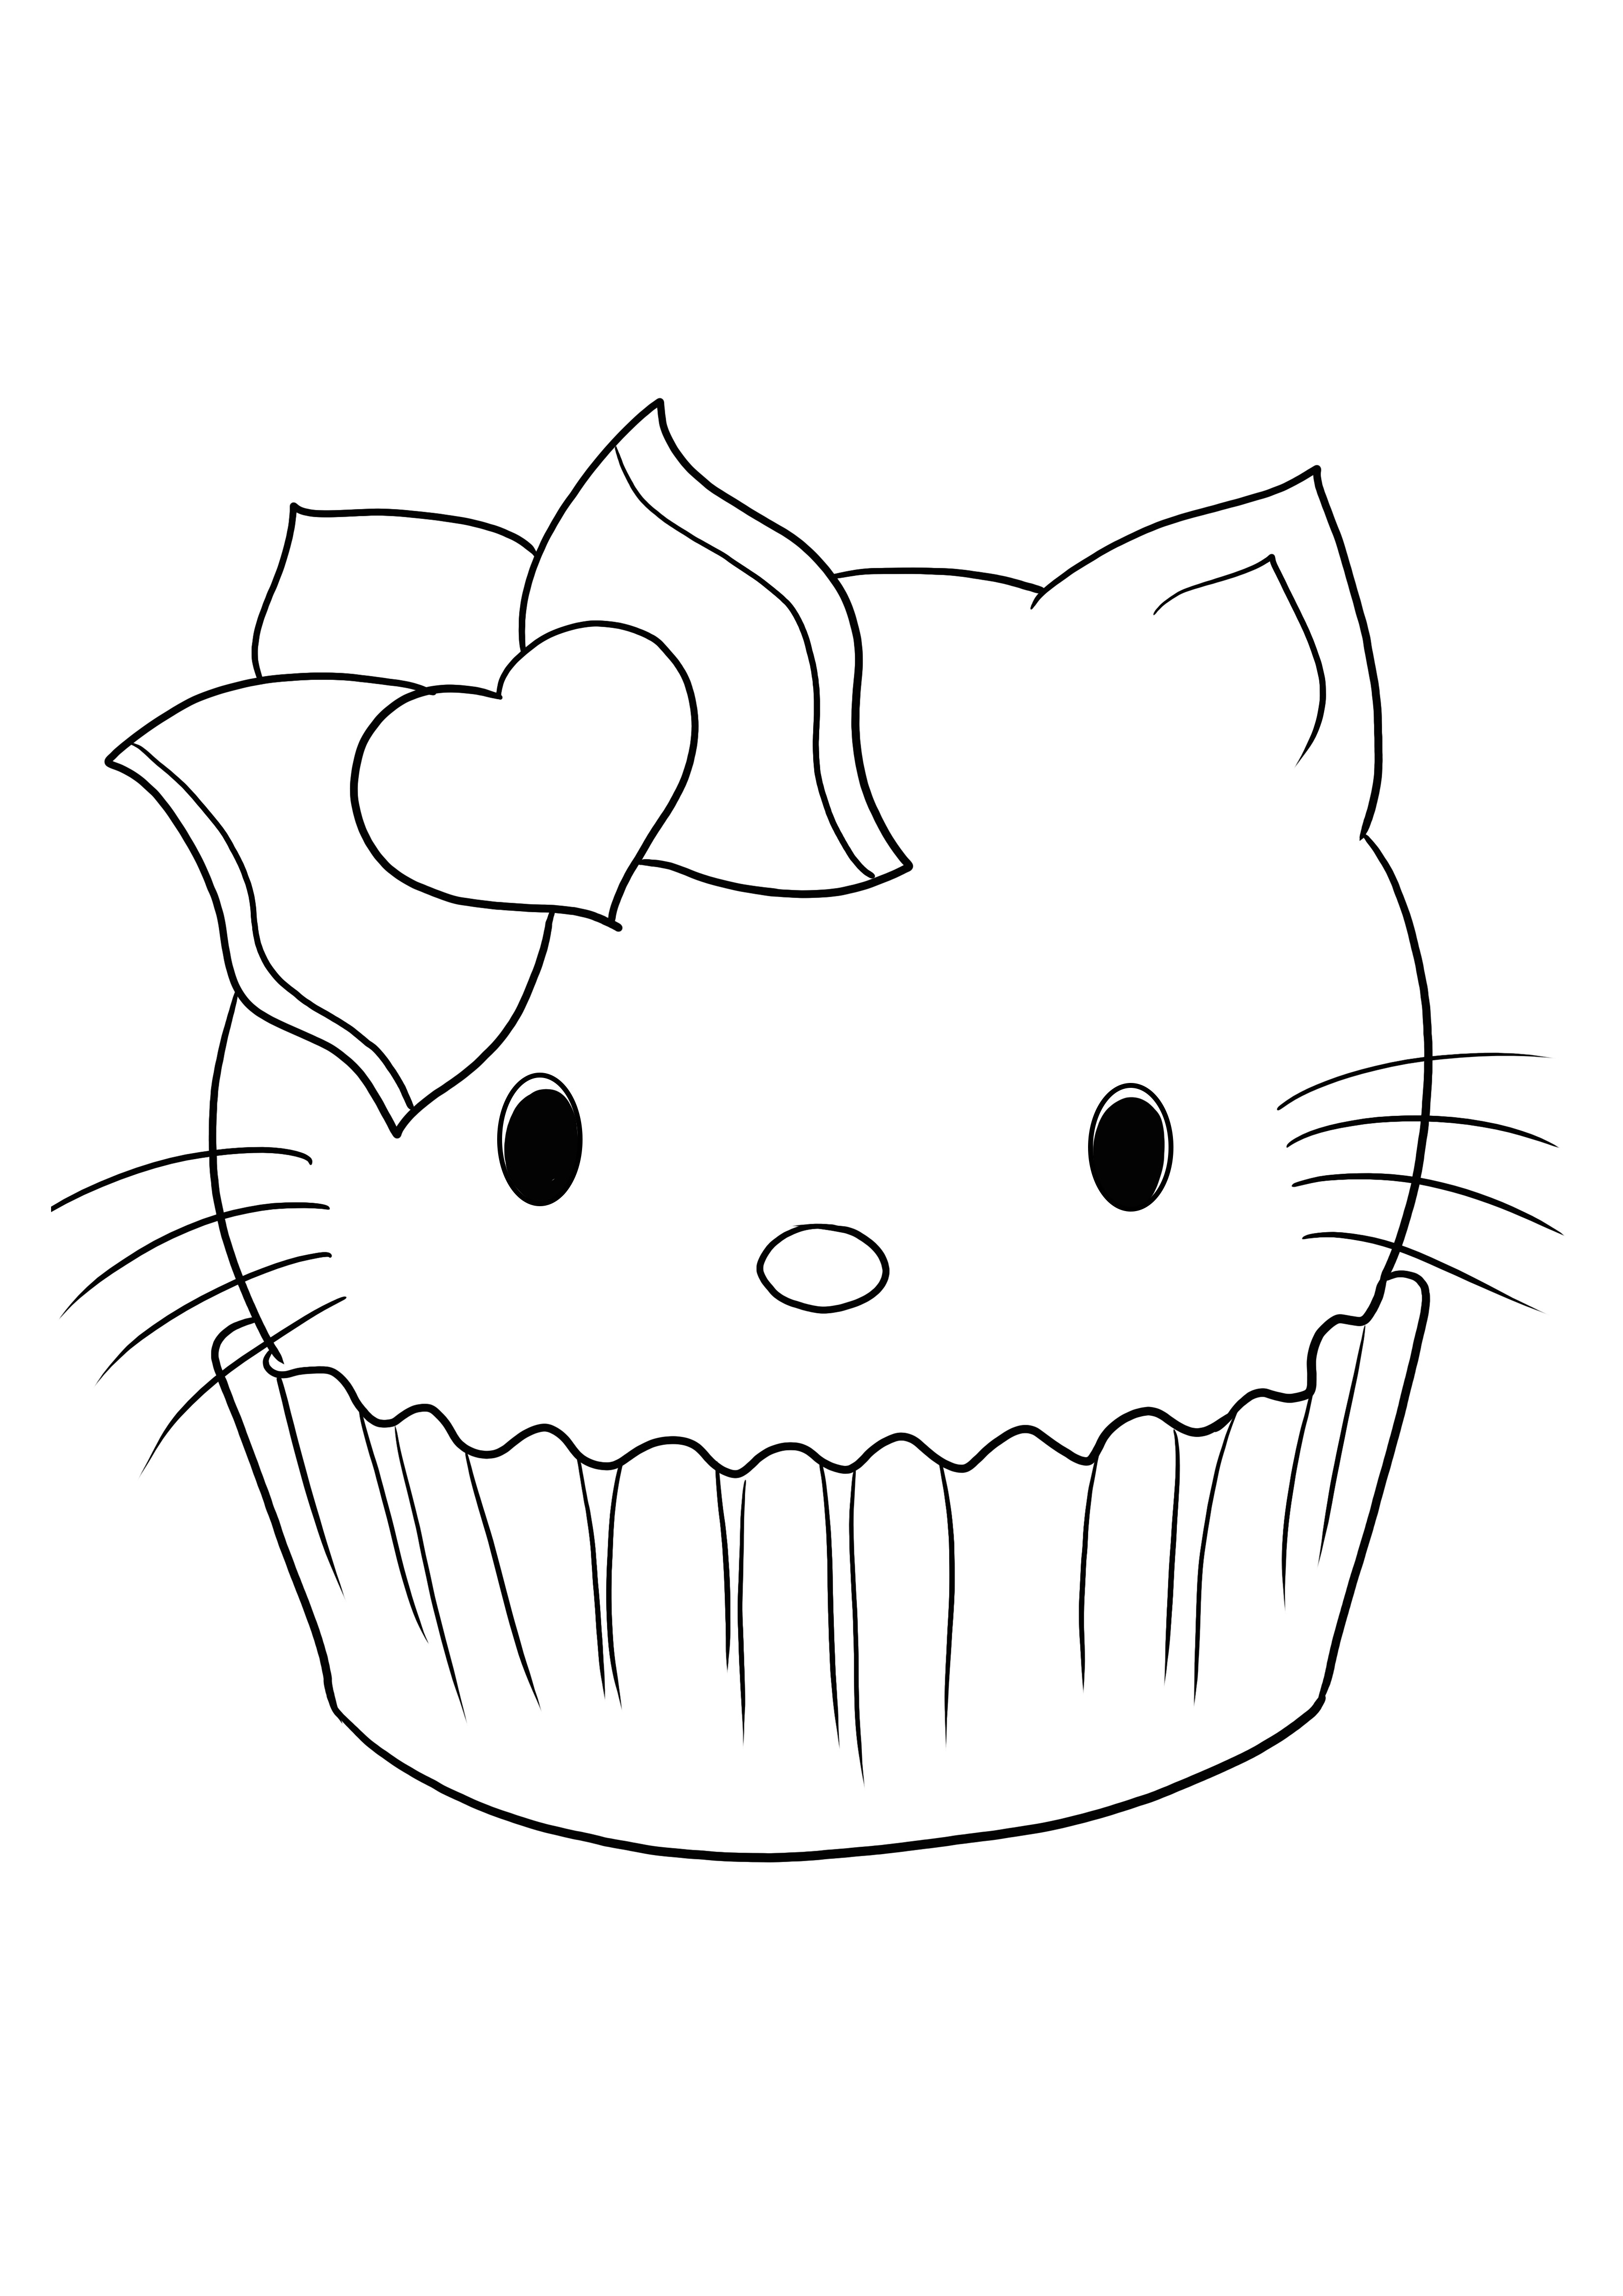 Hello Kitty in a Cupcake easy to download or print and color for kids